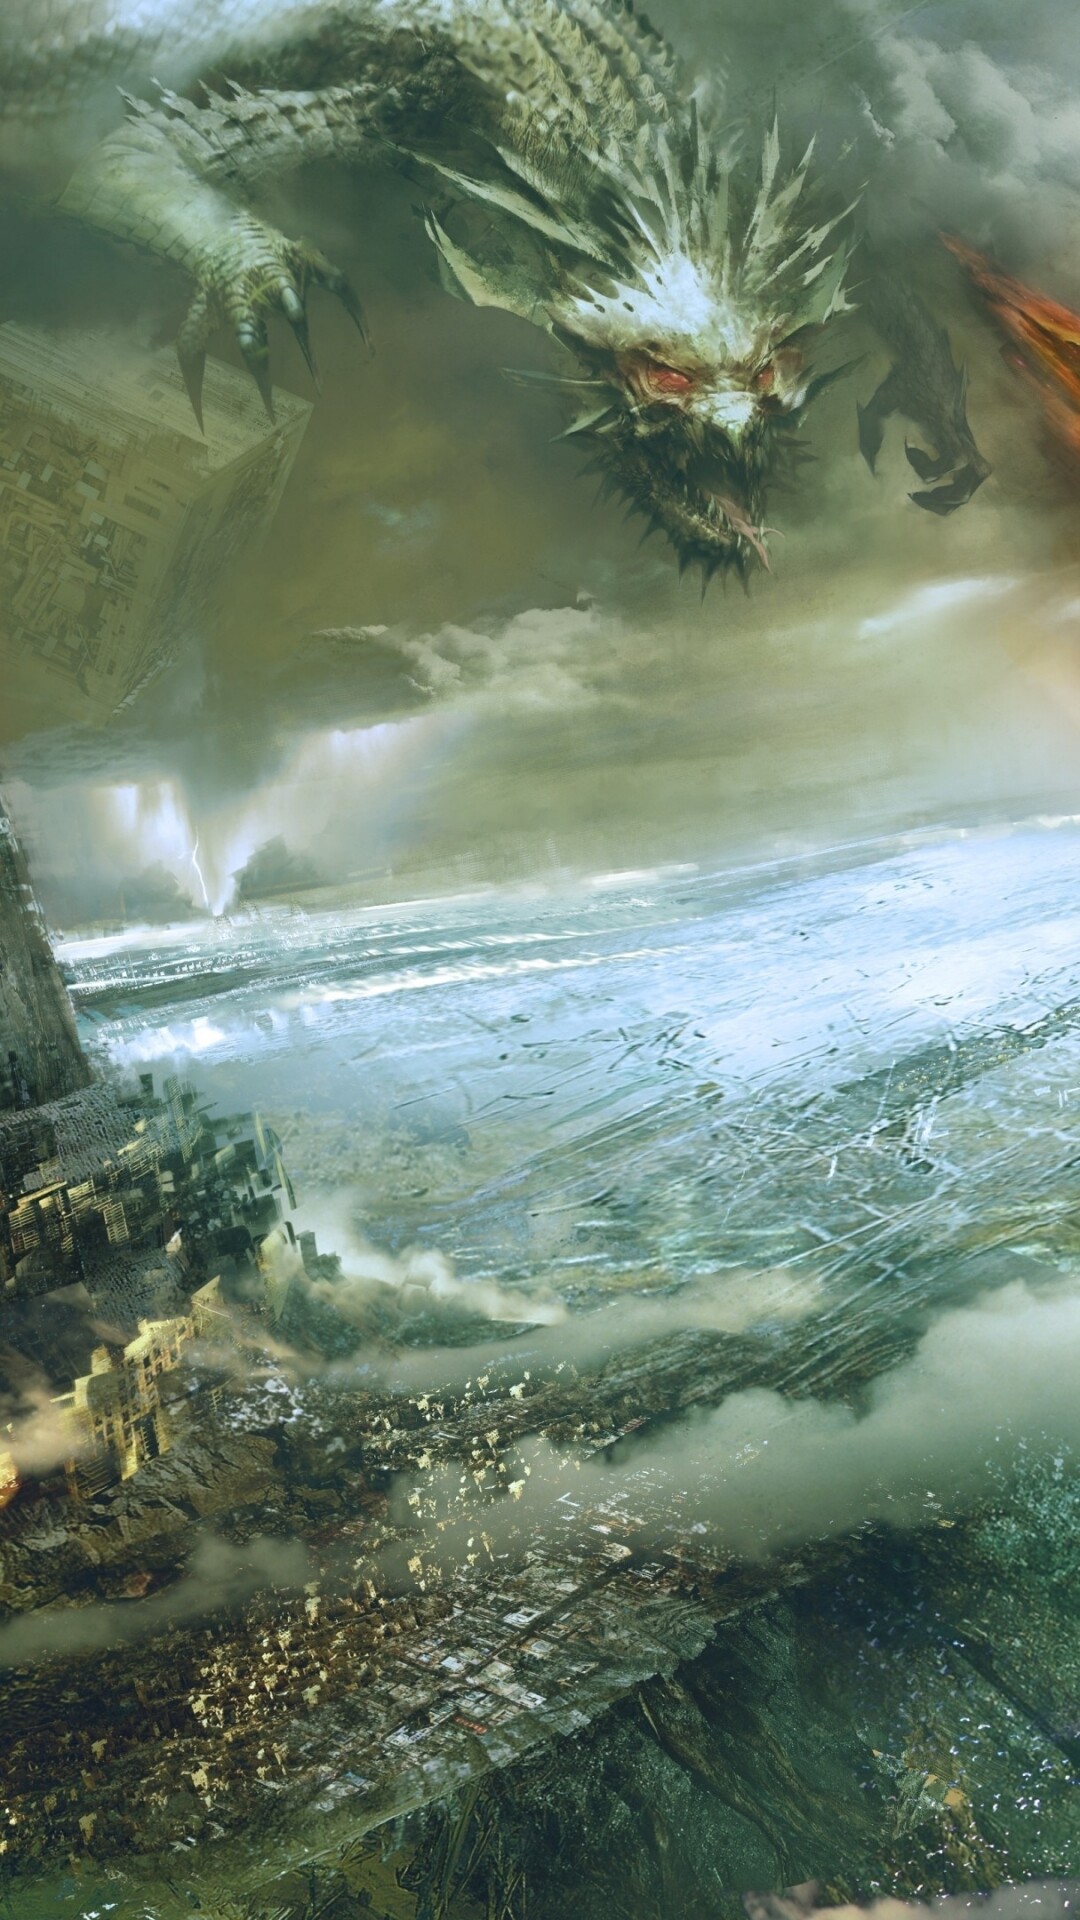 Guild Wars: Gameplay revolves around completing quests and defeating enemies, Video game. 1080x1920 Full HD Wallpaper.